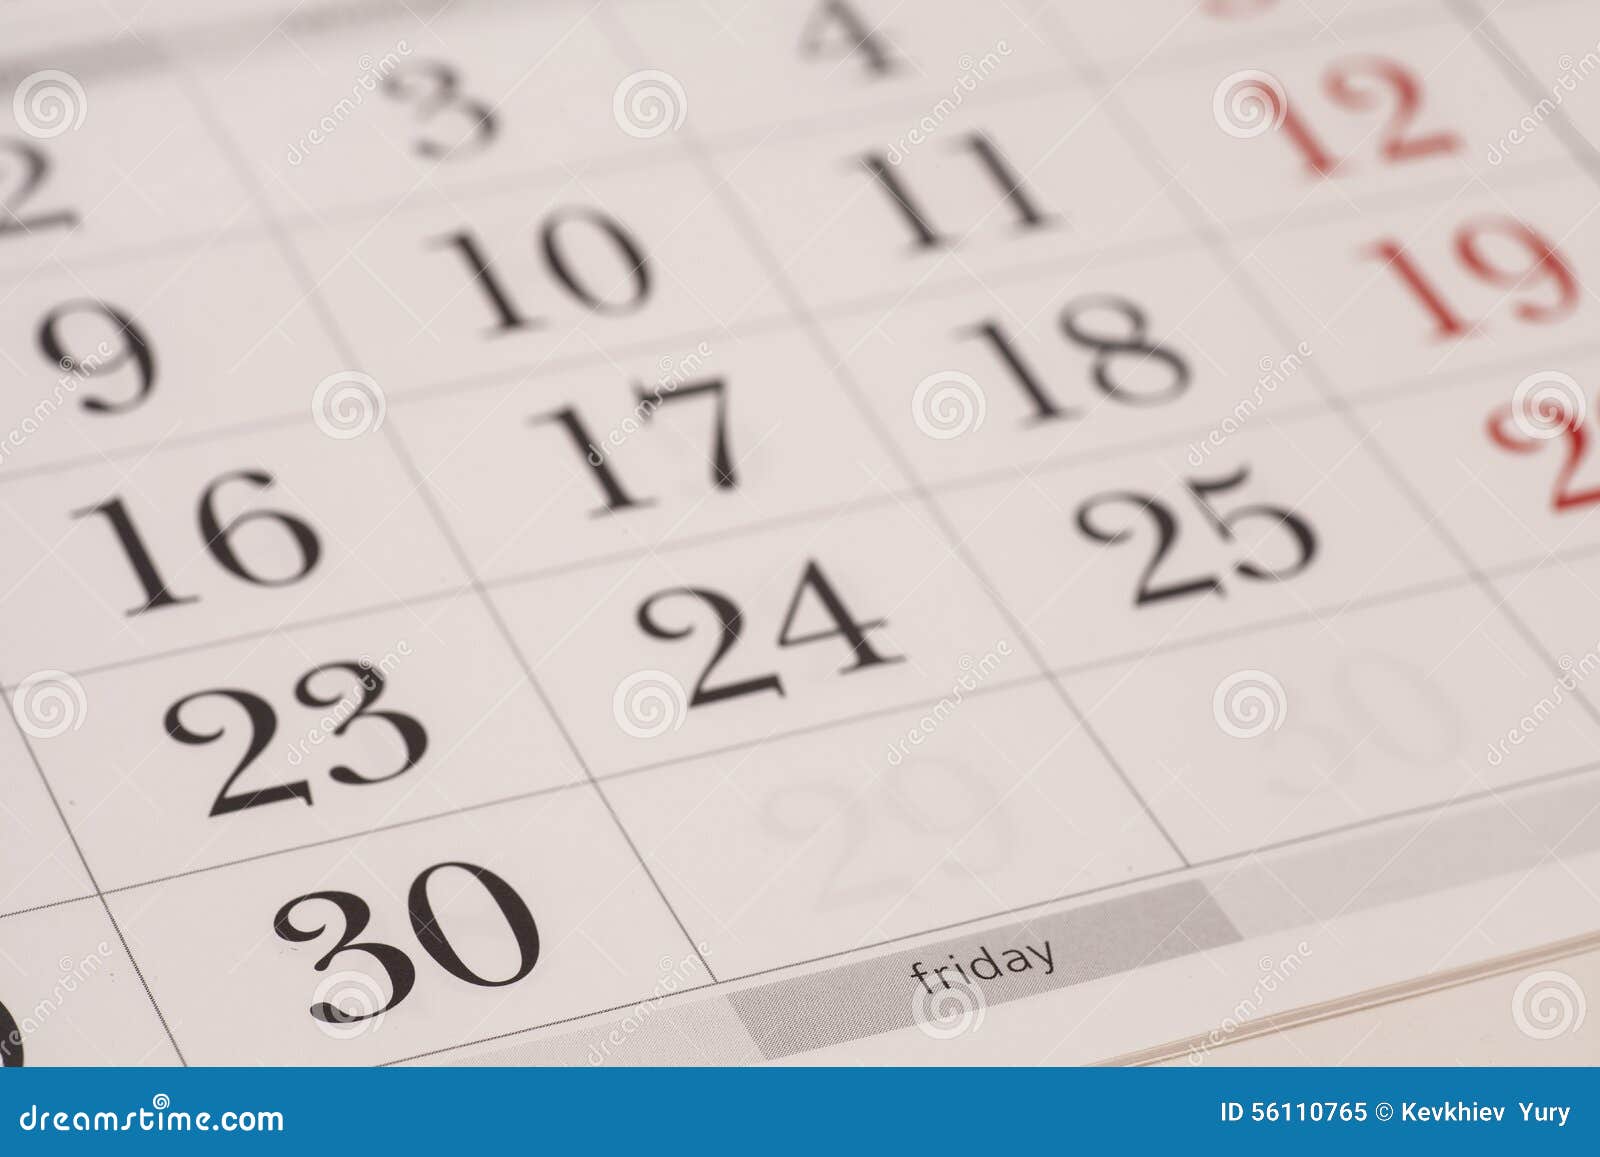 calendar-friday-stock-image-image-of-friday-schedule-56110765